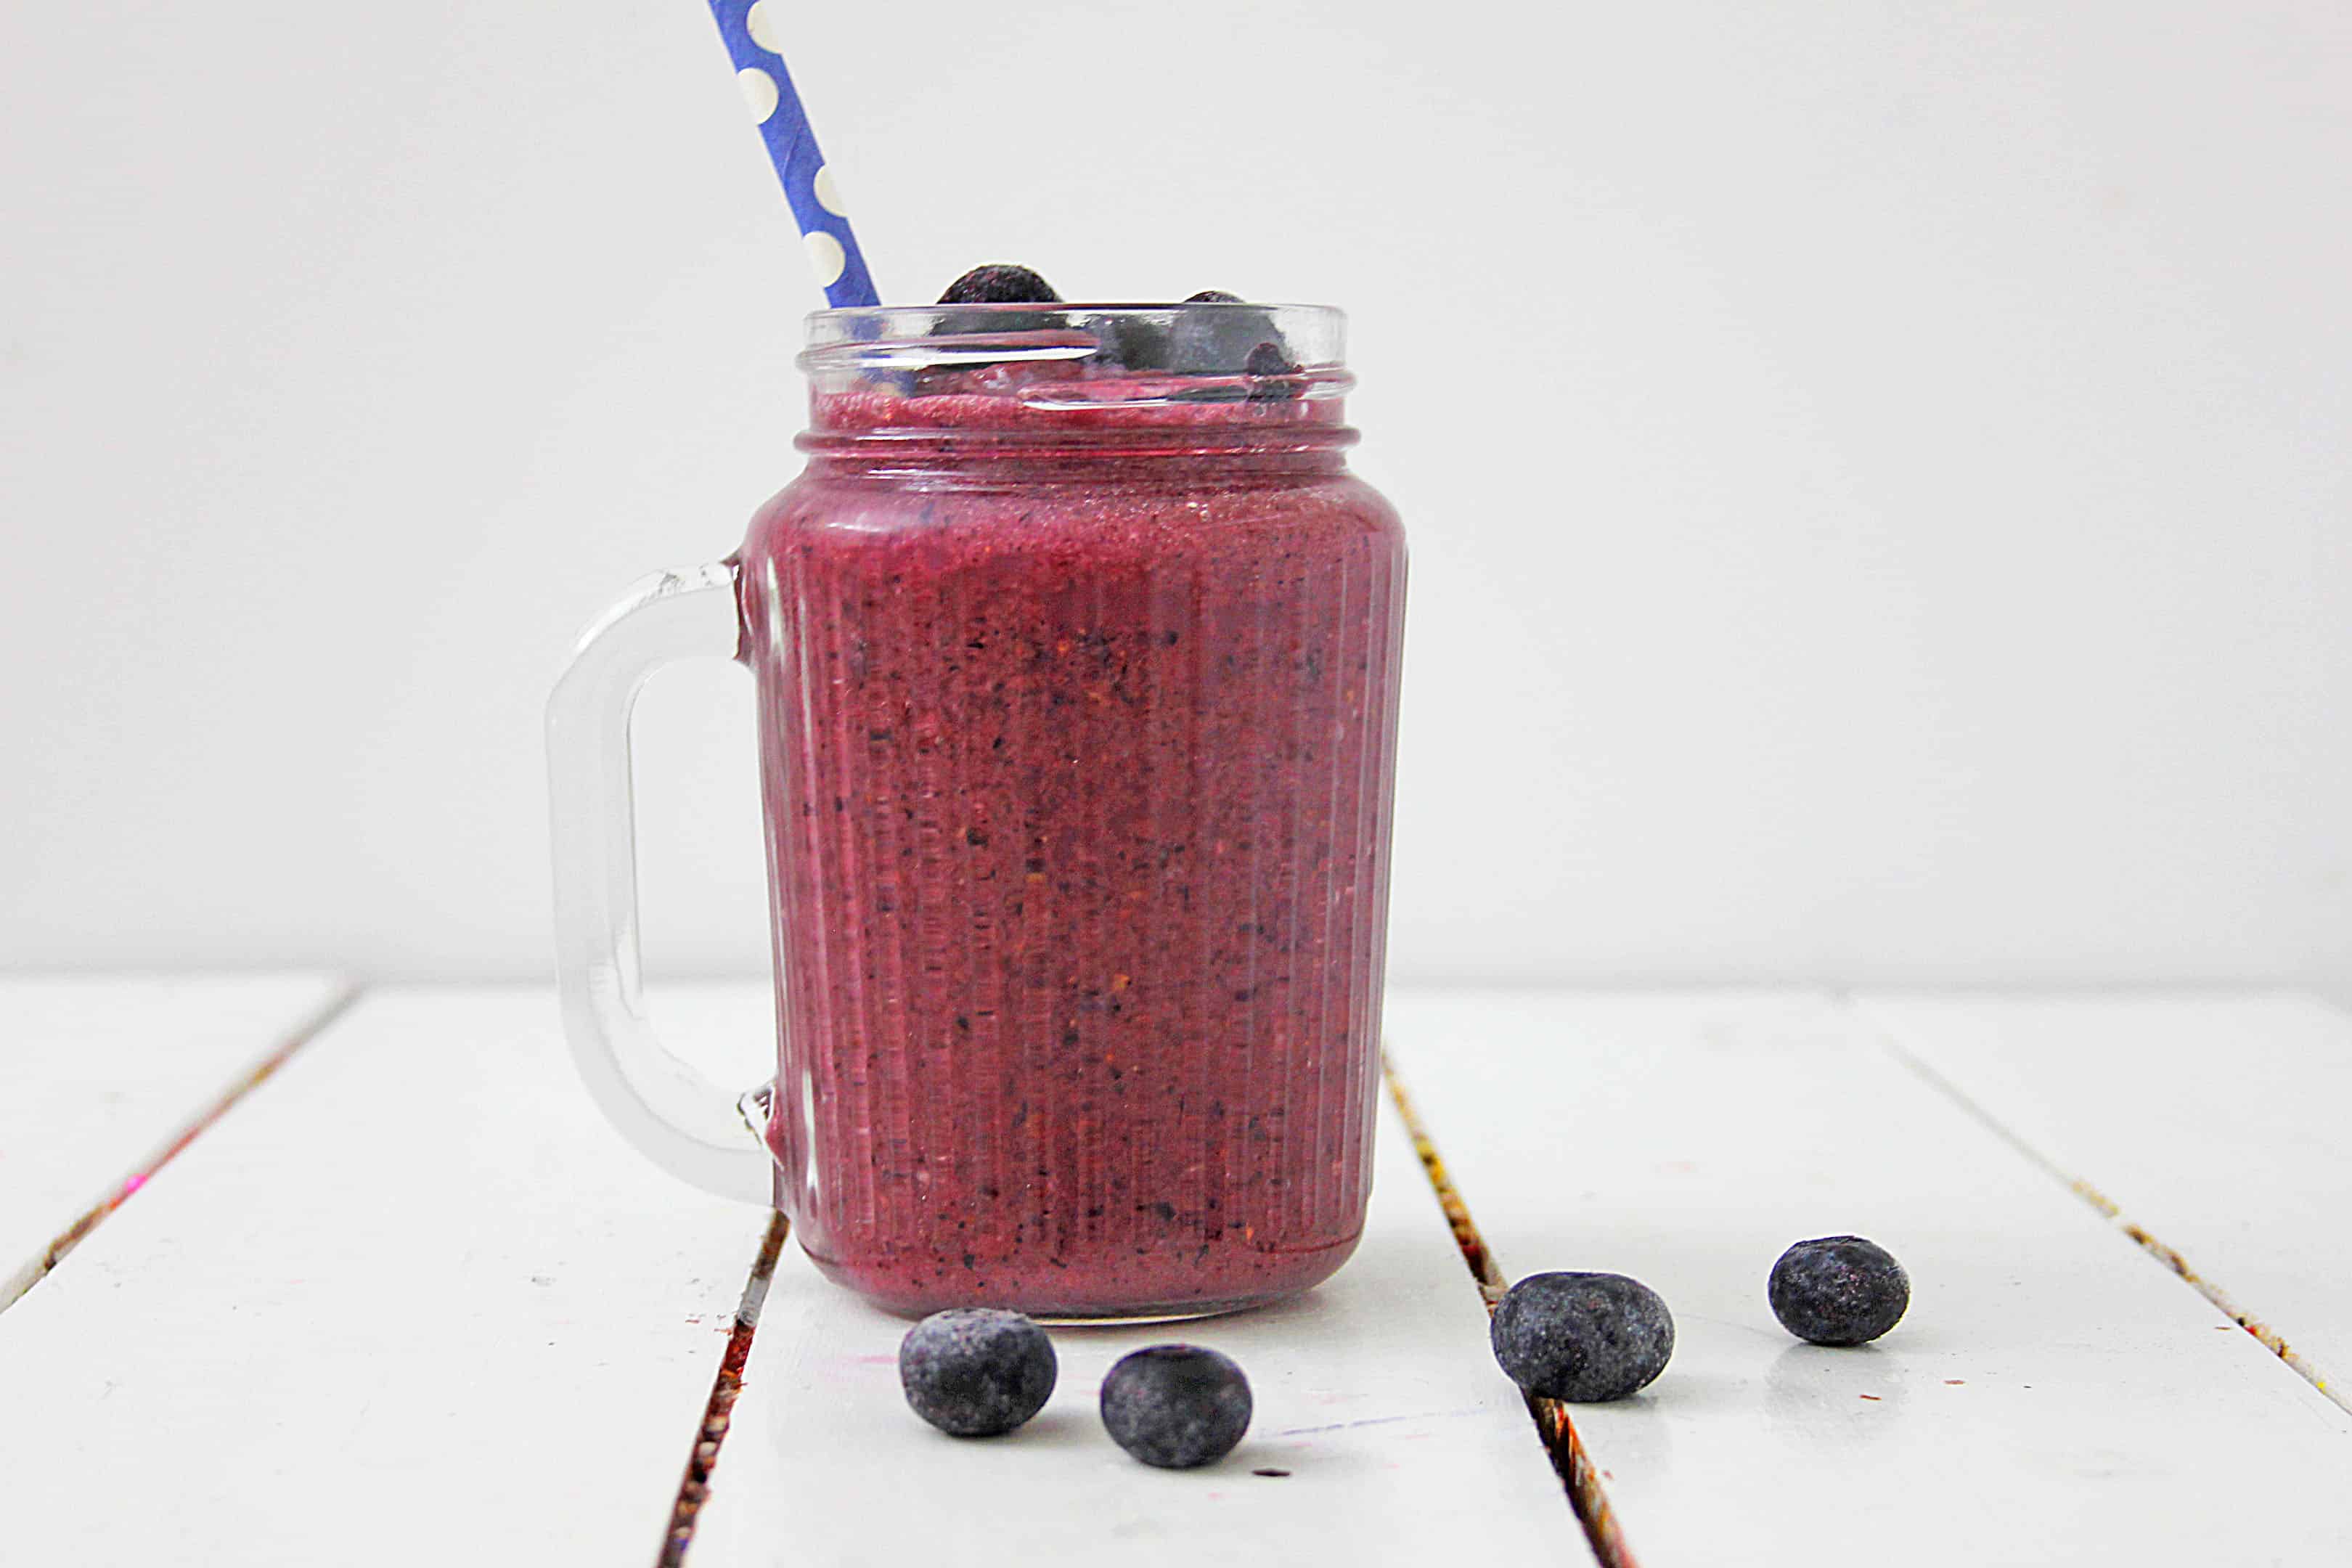 This easy to prepare blueberry banana smoothie will start your day with a delicious healthy drink, that will give you energy and keep you going. It's not only good for you, it's tastes good too!